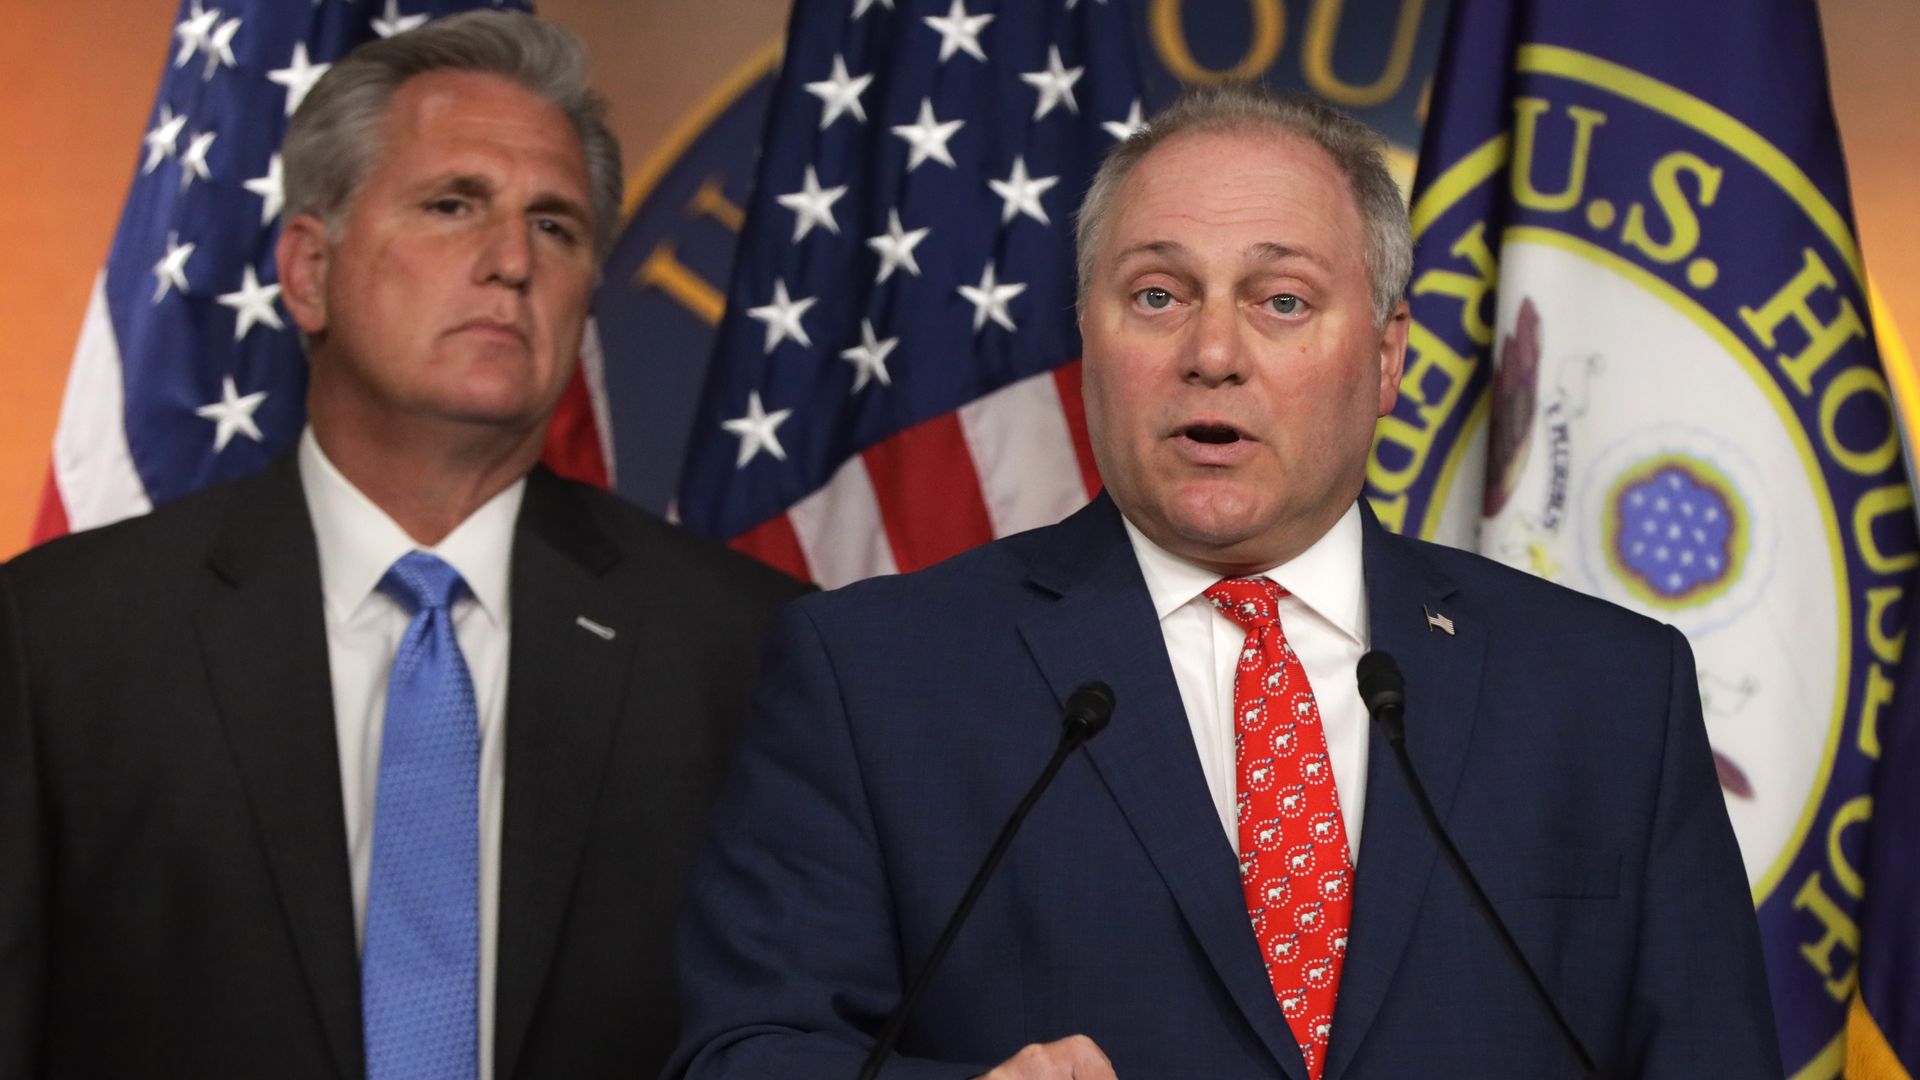 House Minority Leader Kevin McCarthy and House Minority Whip Steve Scalise are seen speaking at the Capitol.